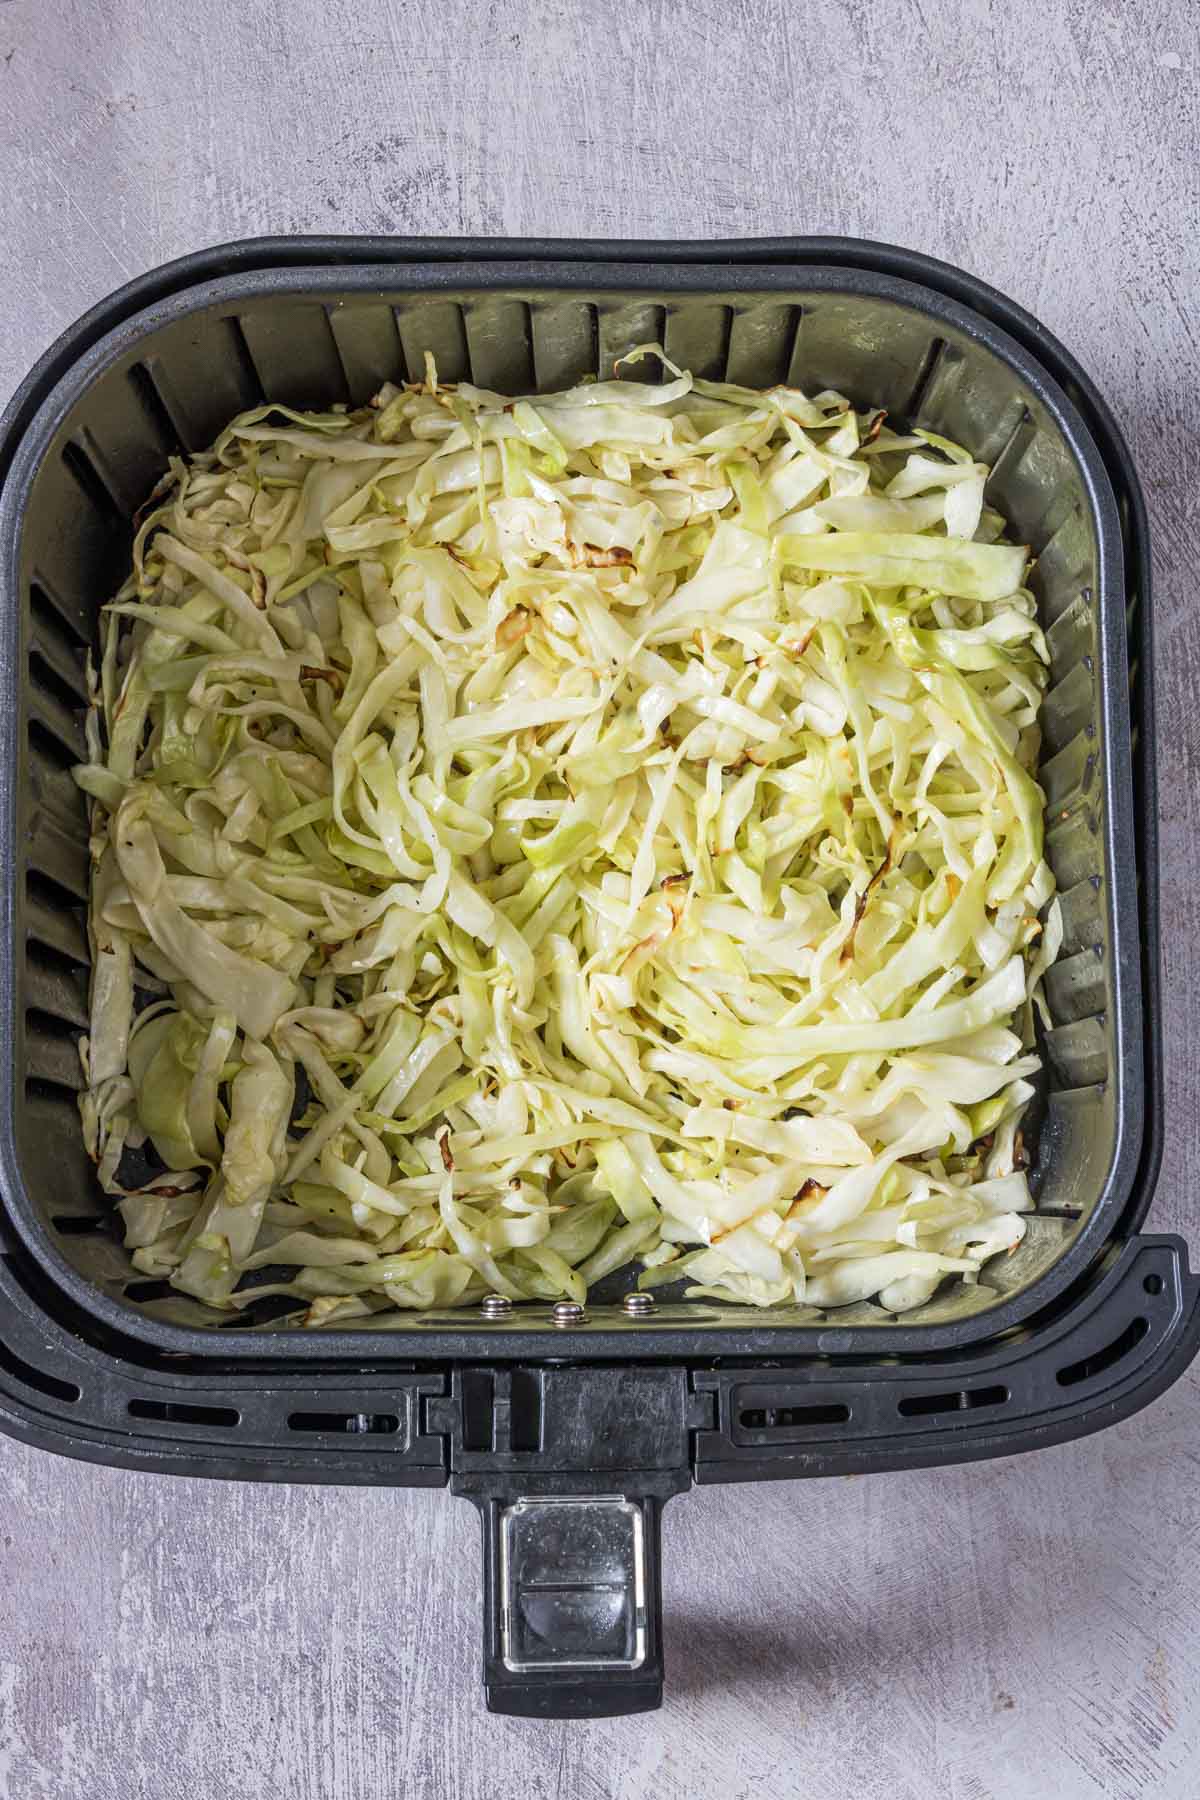 the completed air fried cabbage recipe inside the air fryer basket.